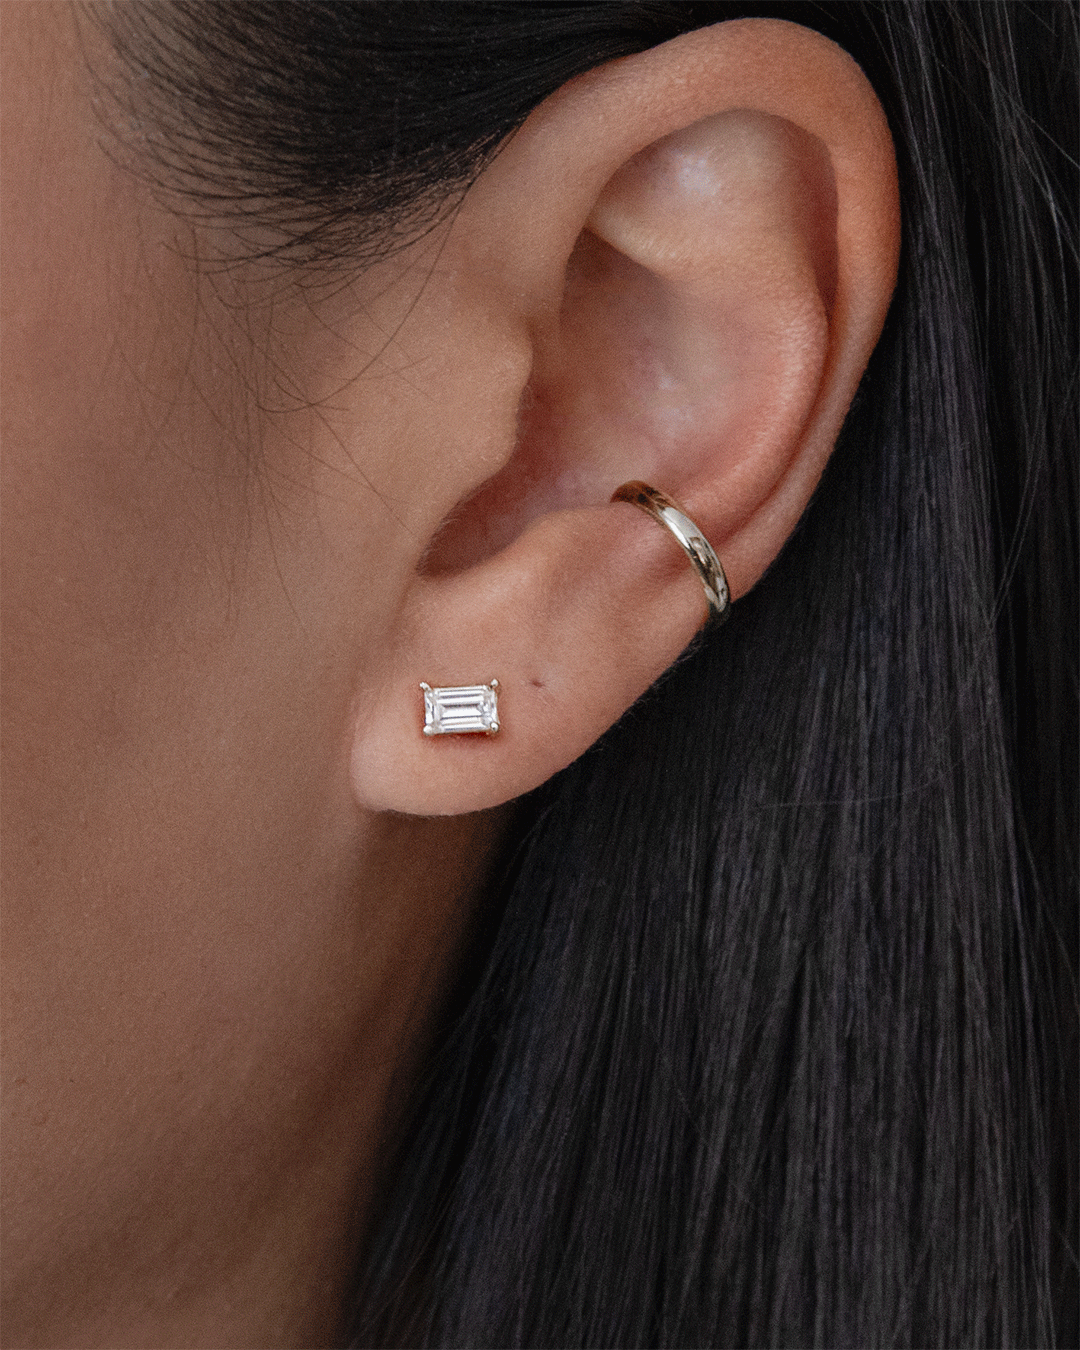 The Statement Earring Capsule Set - Silver